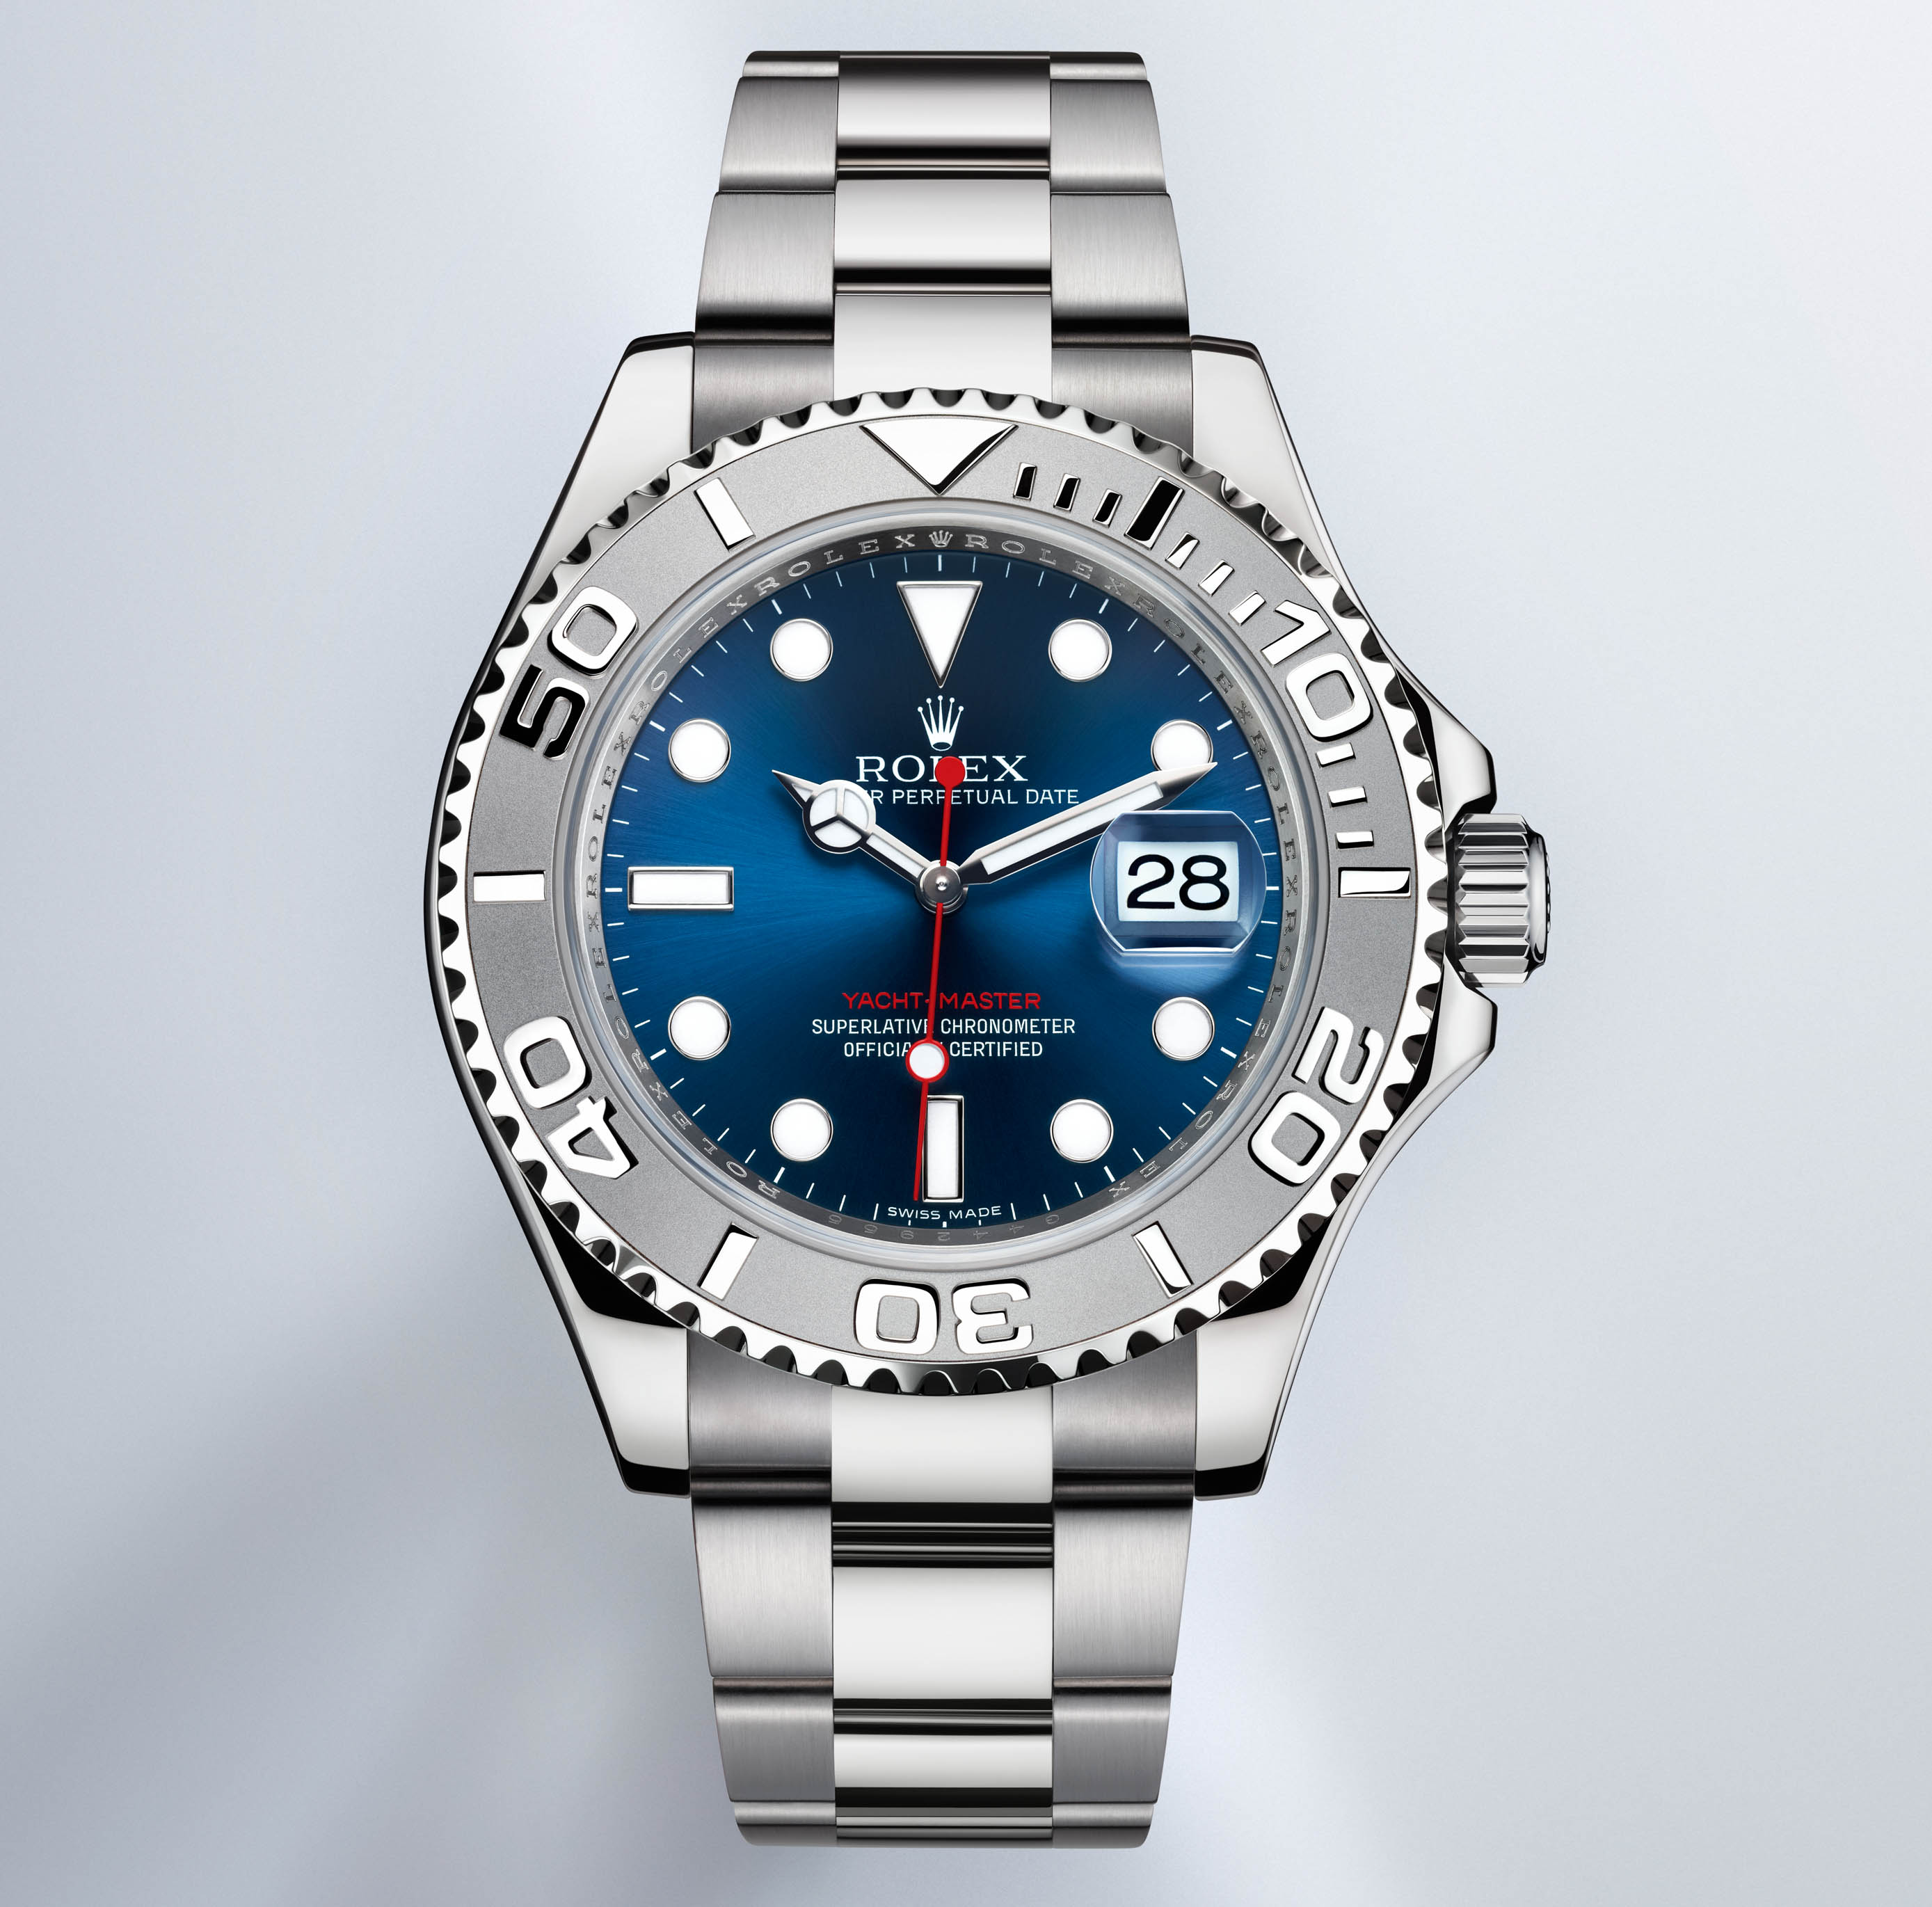 rolex oyster perpetual date yacht master superlative chronometer officially certified